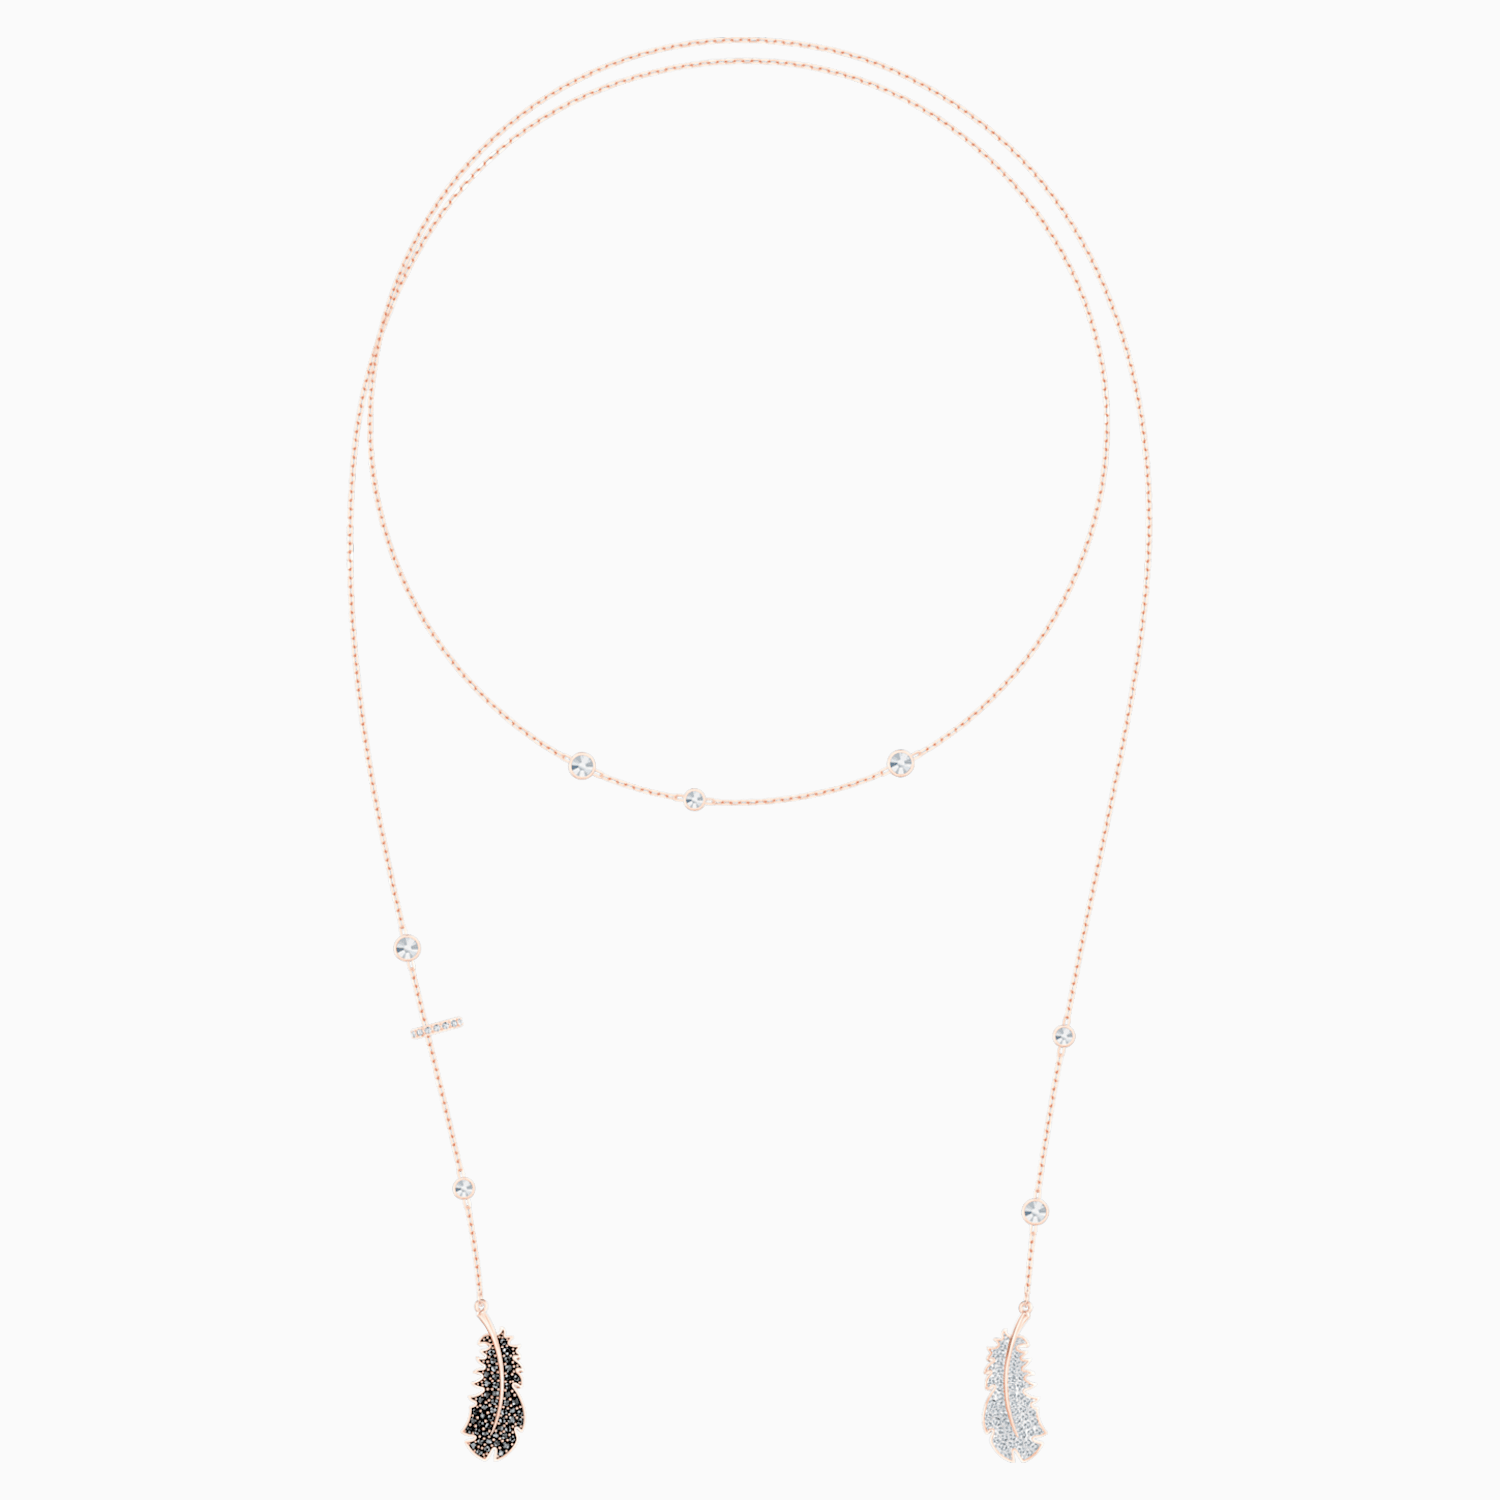 Naughty Necklace, Black, Rose-gold tone 